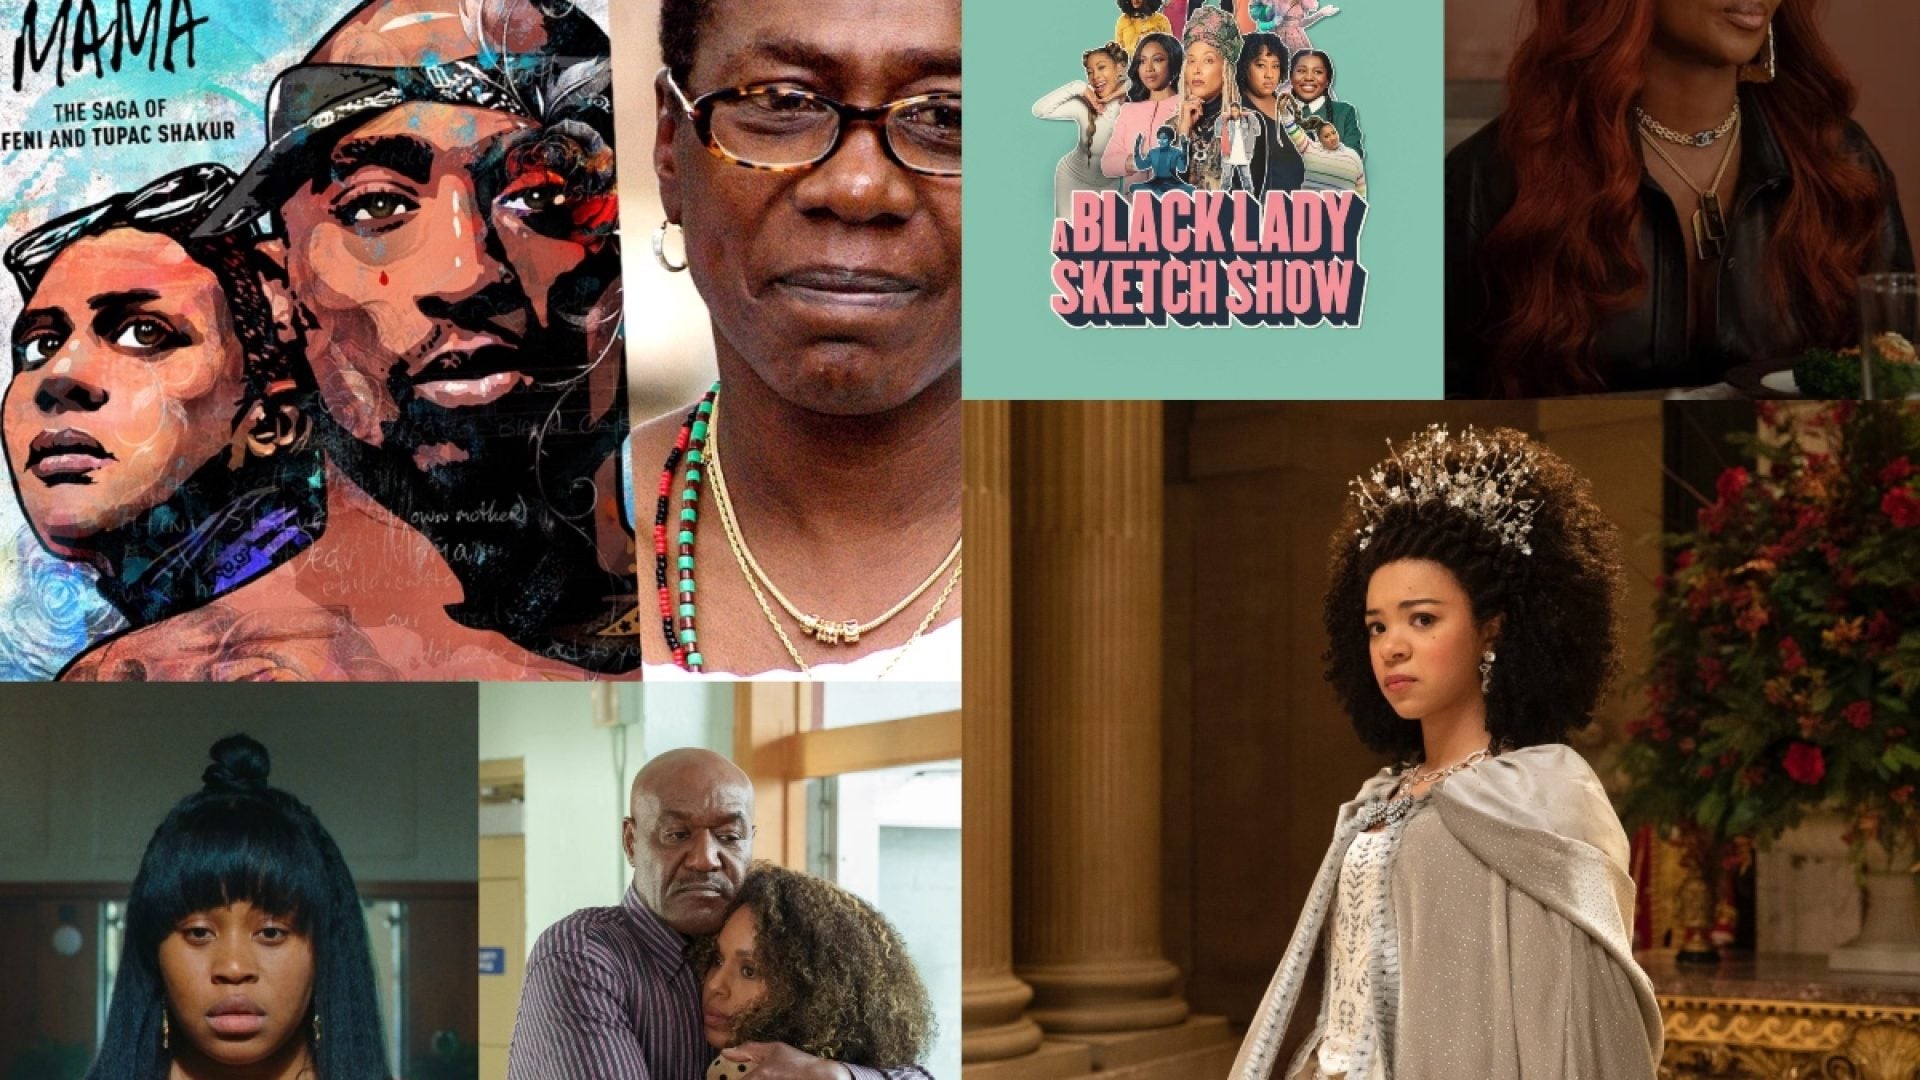 ESSENCE Entertainment Preview: 10 Black Shows That You Must Watch This Spring

